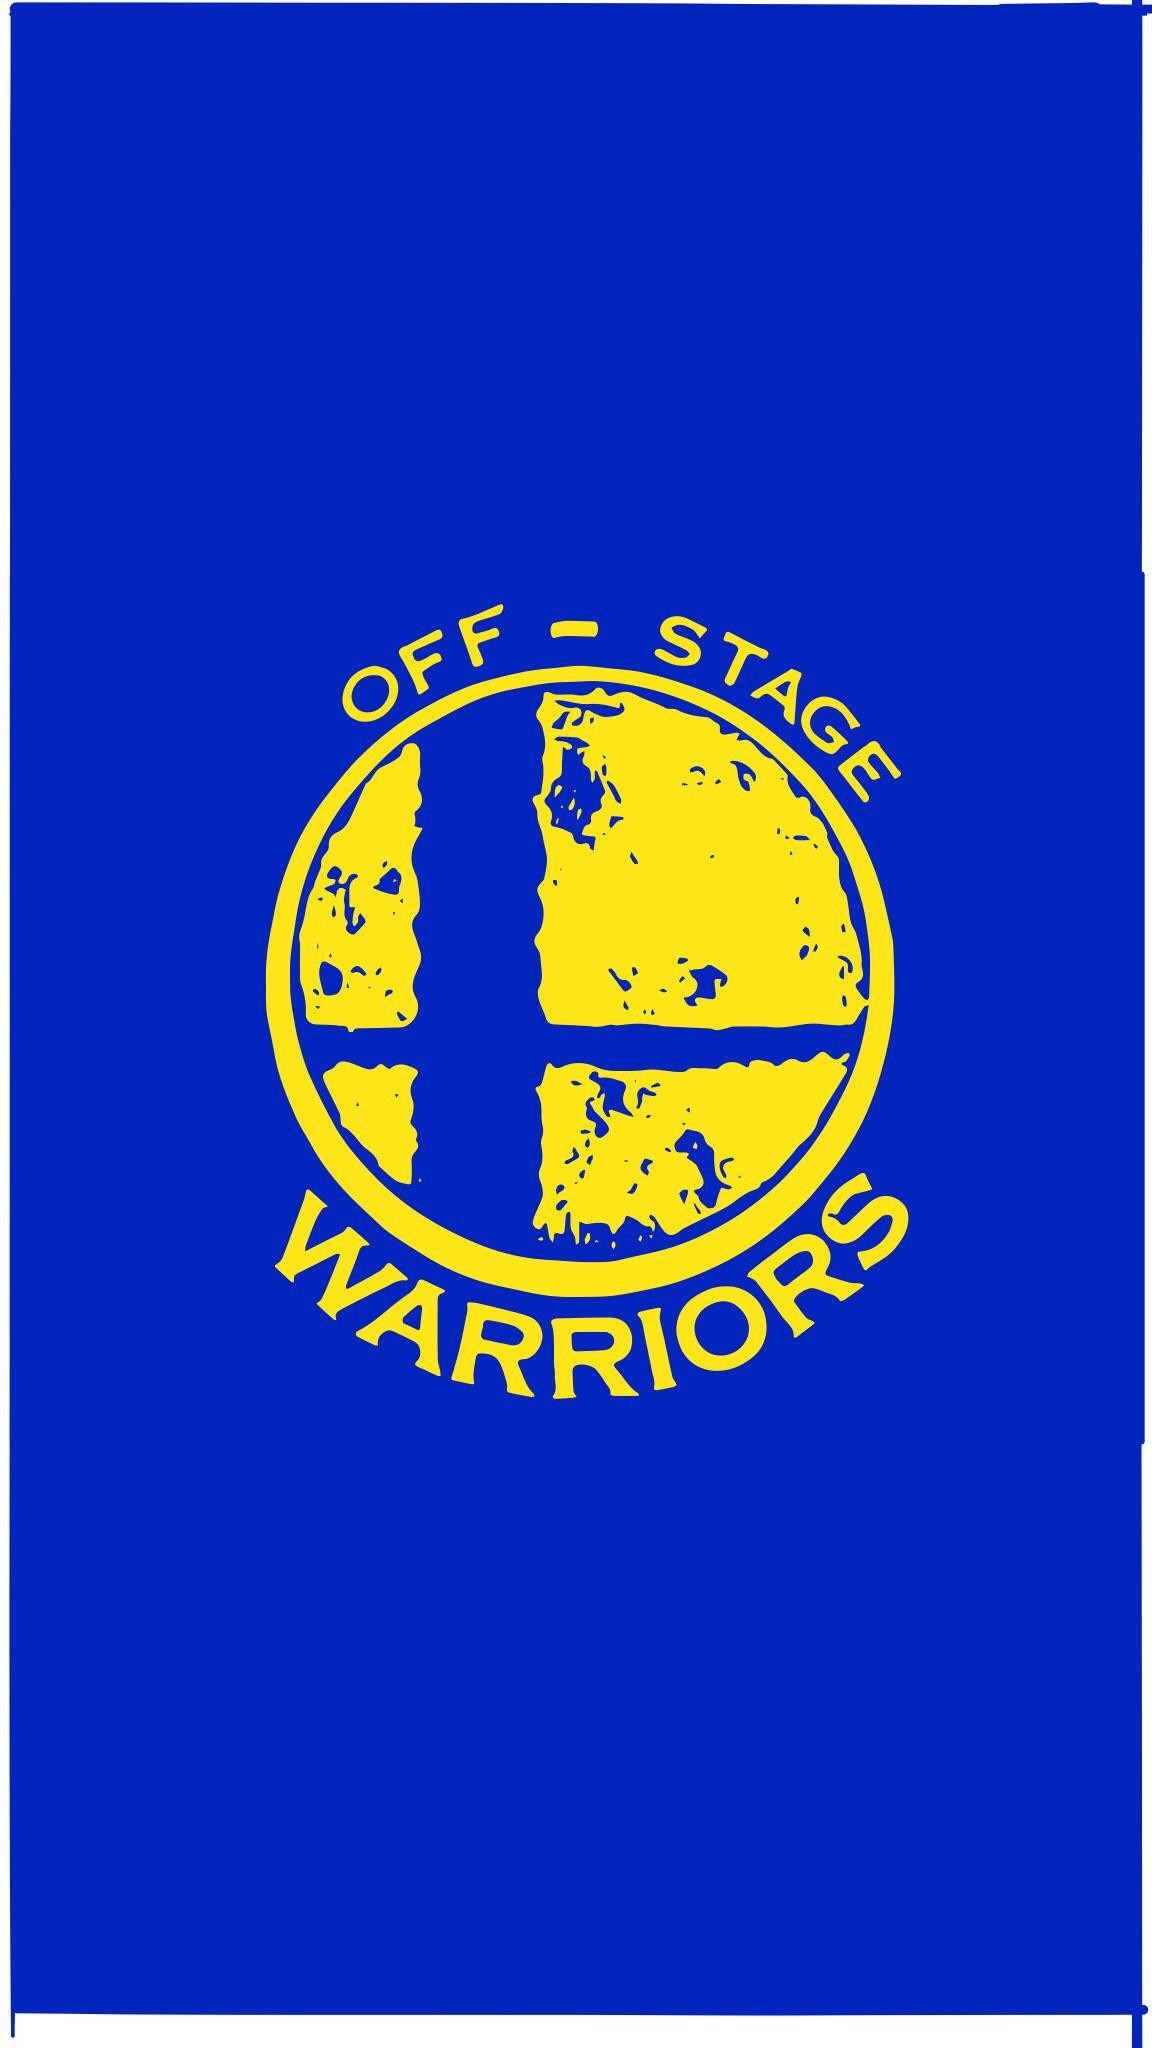 1152x2048 Smash SwitchI made this iPhone wallpaper based on the Golden State warriors  logo, which looks a bit like a smash ball, with Photoshop ...